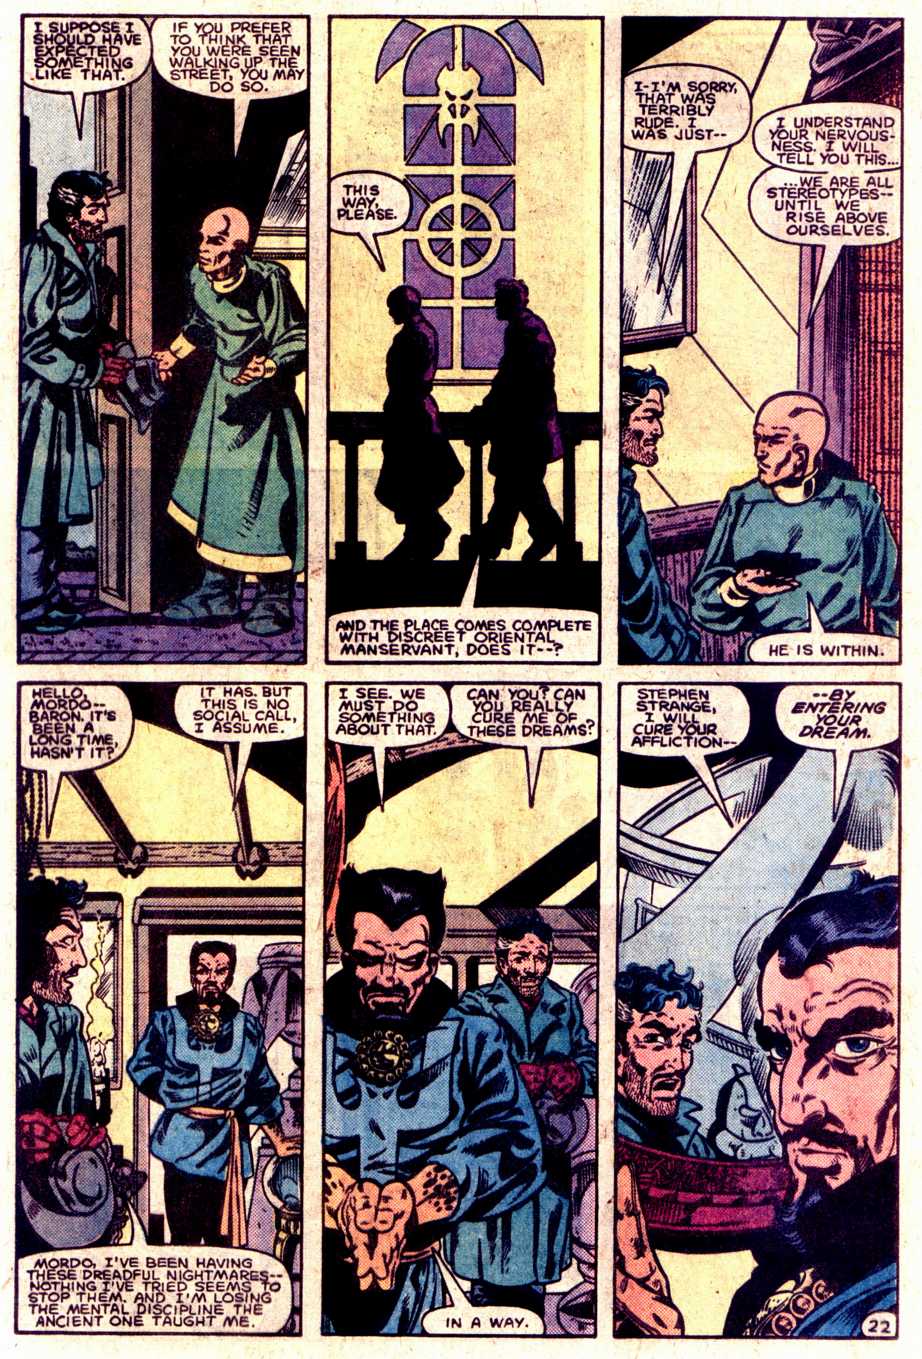 What If? (1977) issue 40 - Dr Strange had not become master of The mystic arts - Page 23